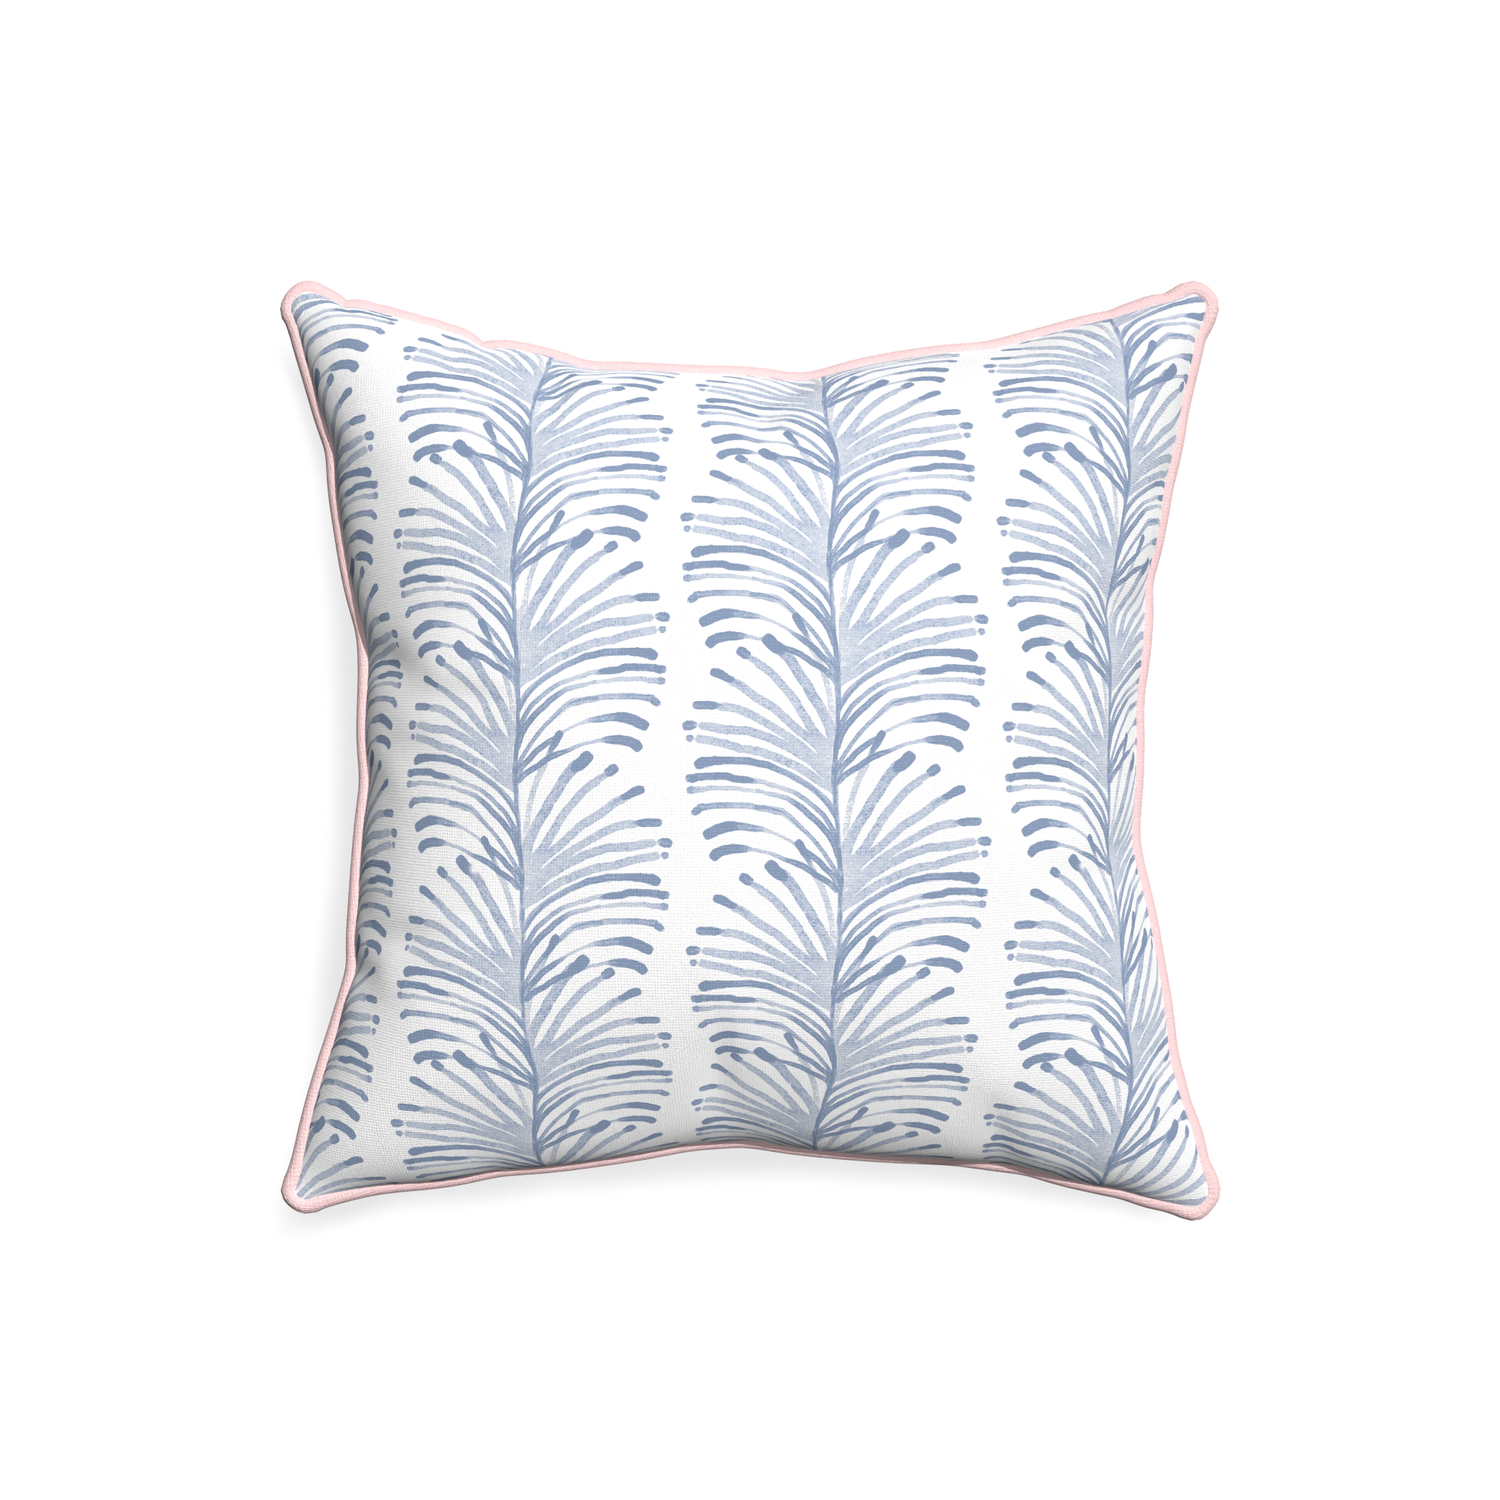 20-square emma sky custom pillow with petal piping on white background